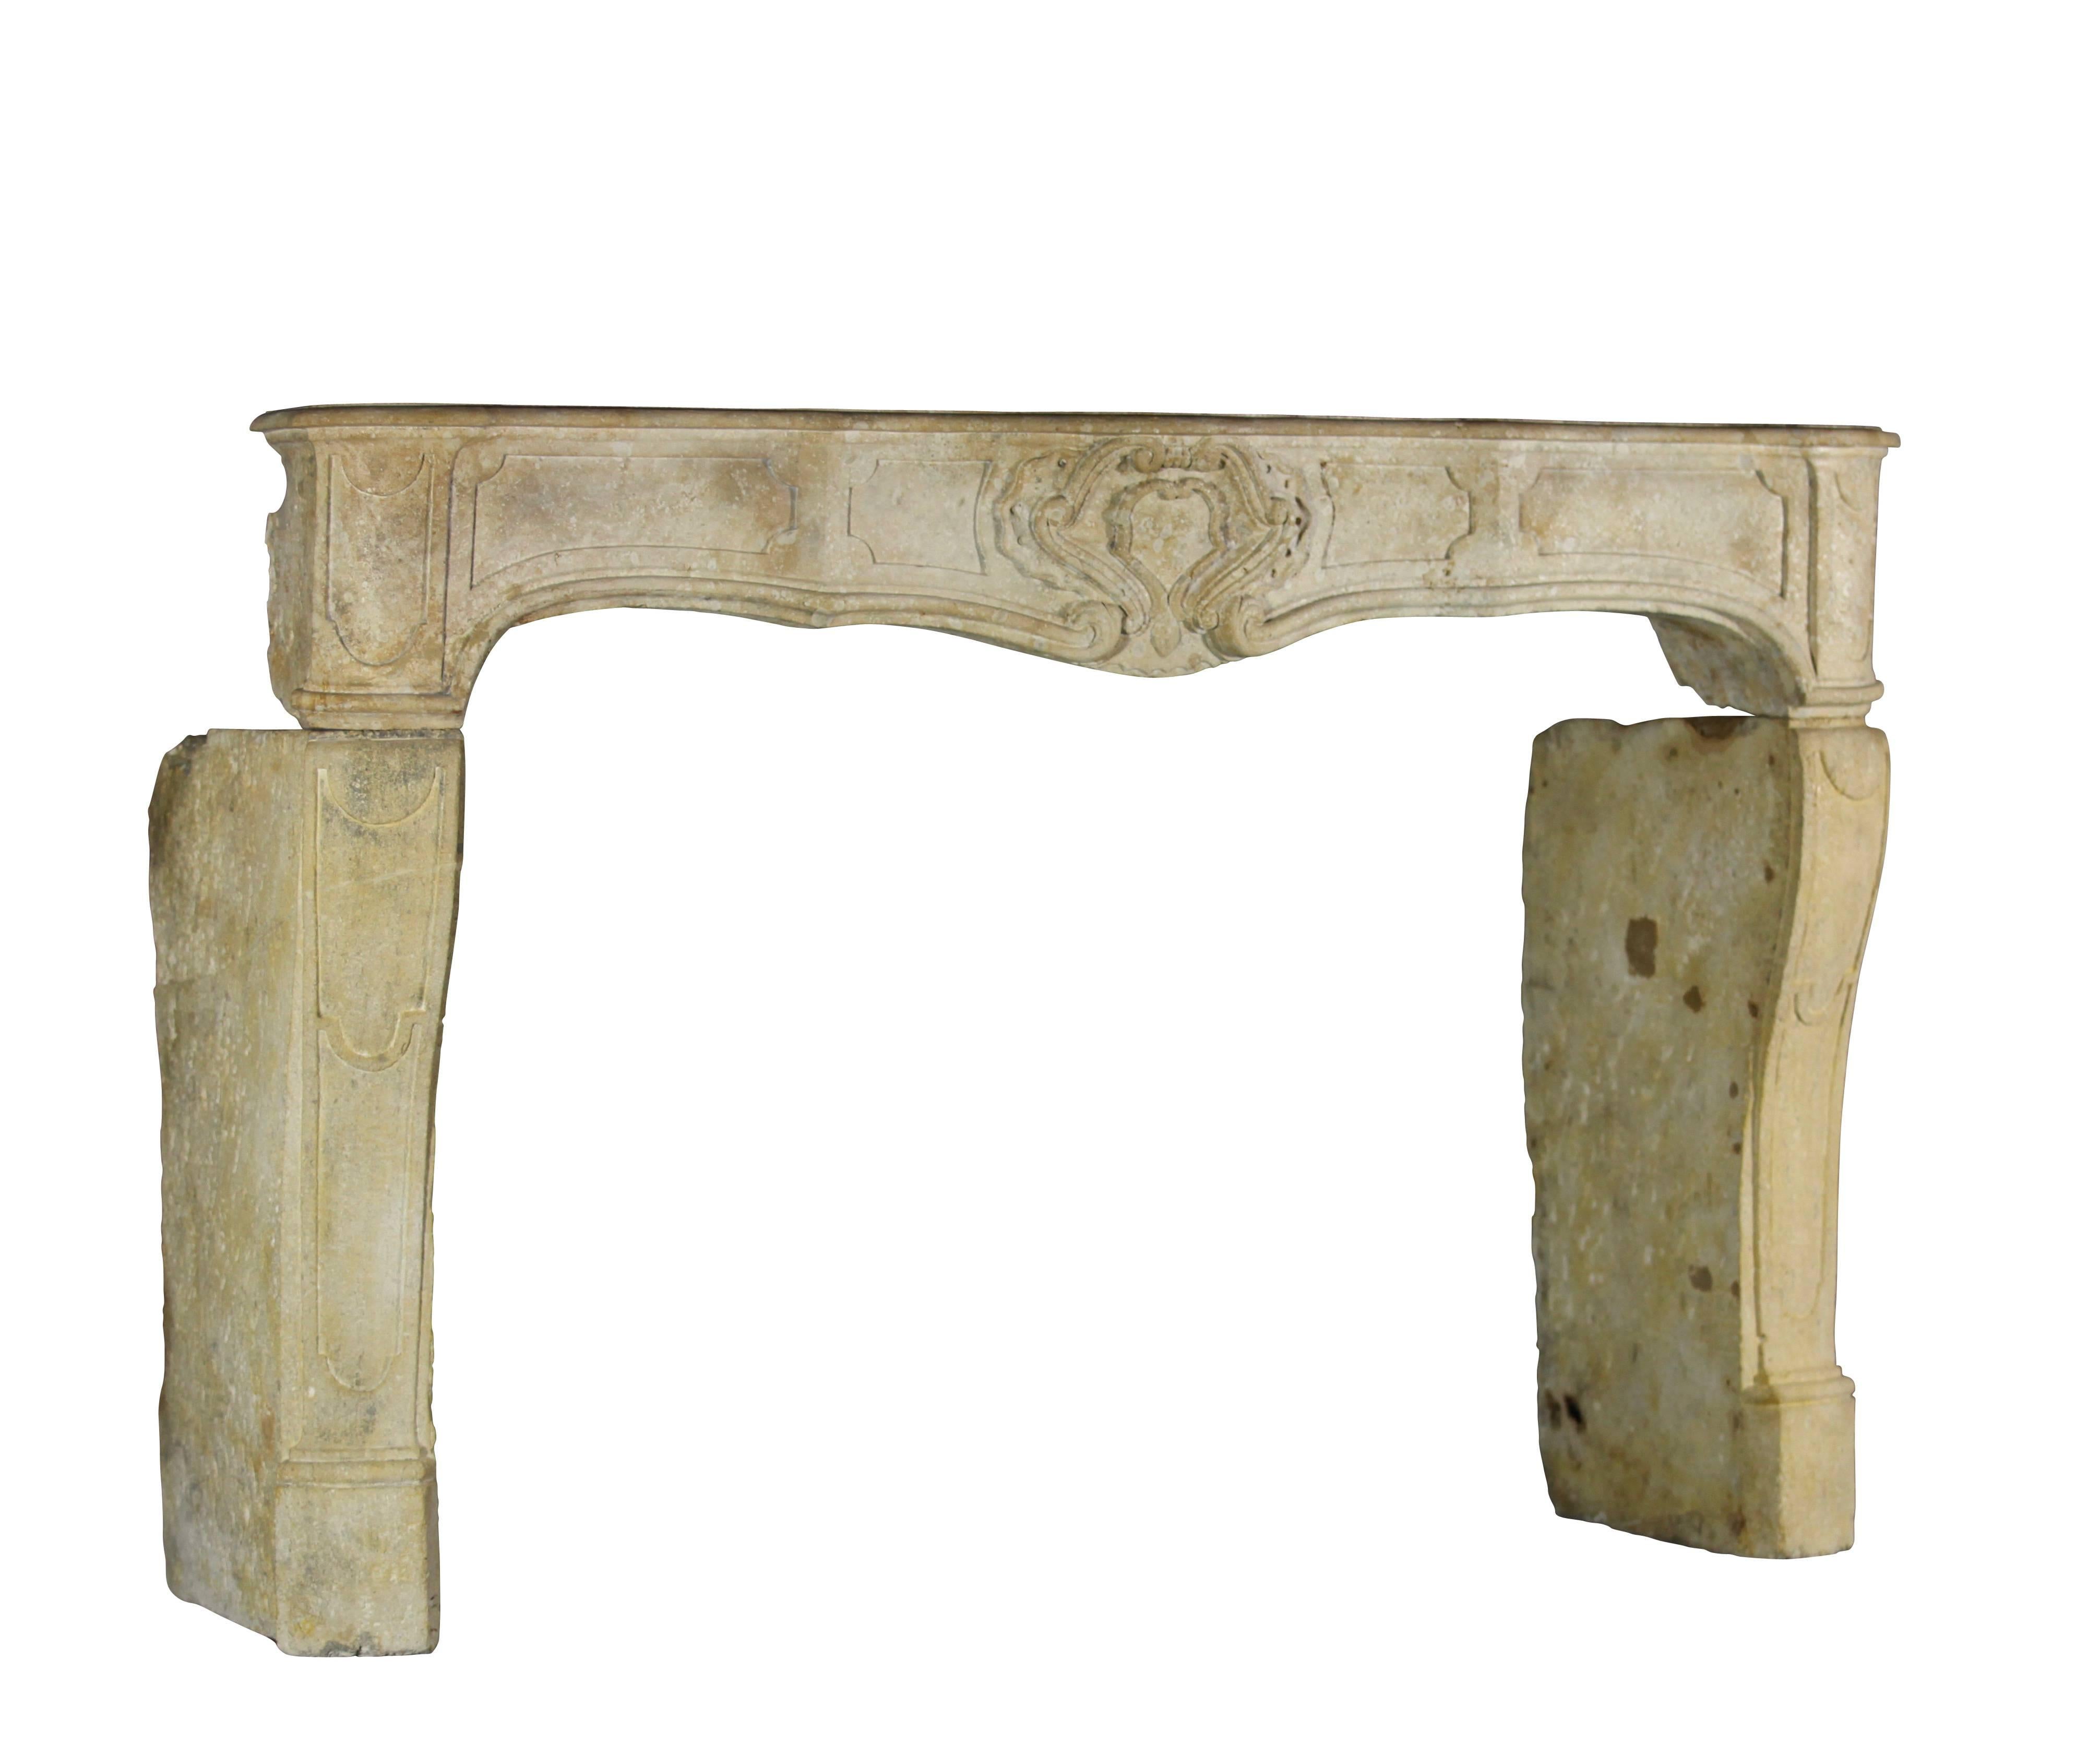 A very special and typical French country original antique fireplace mantel from the south of France. Very rich moving on the front. The center cartouche has a hart like design.

Measures:
171 cm EW 67.32